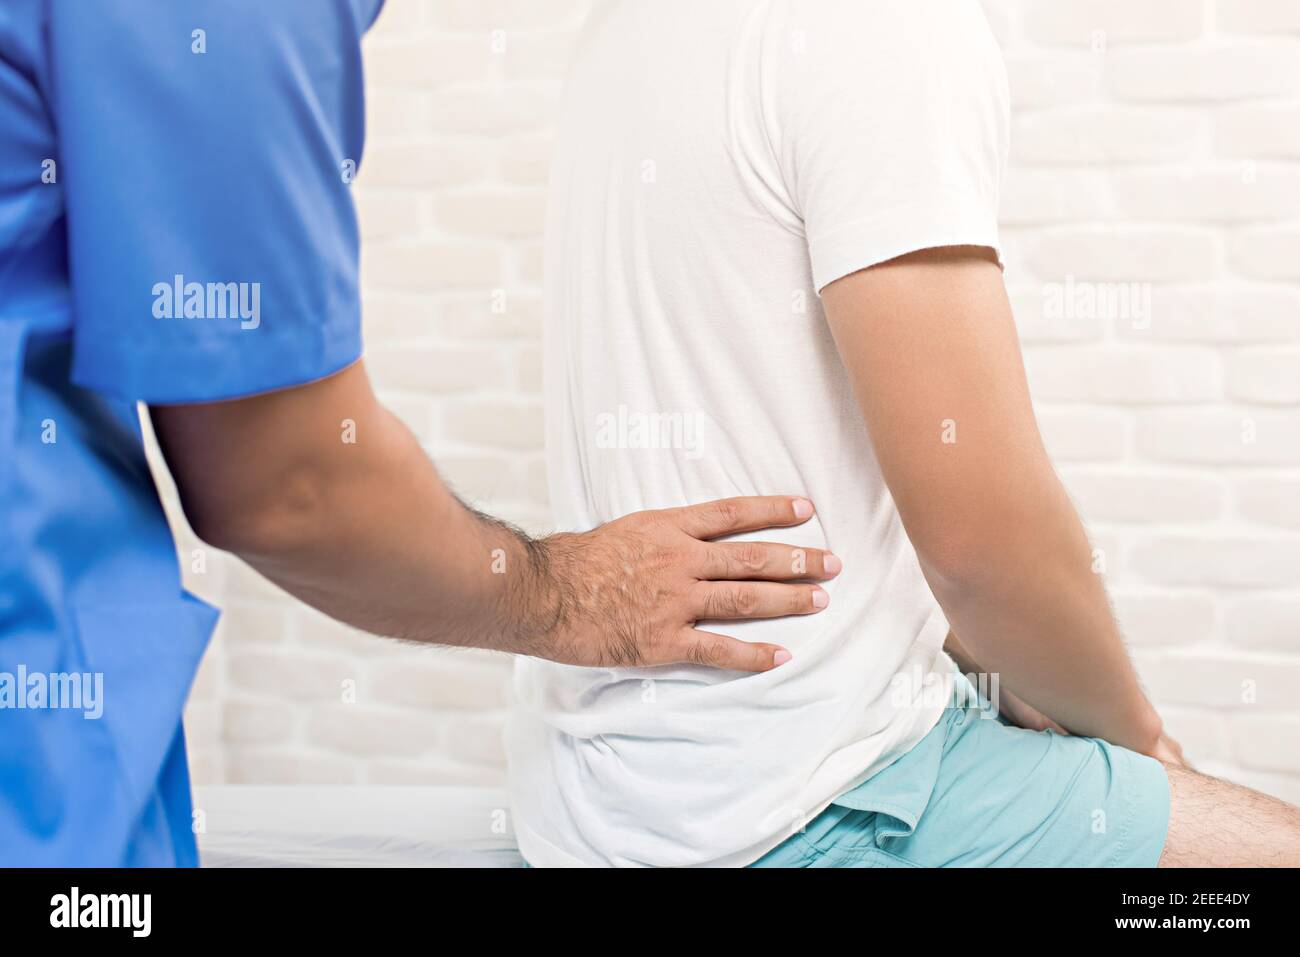 Male doctor therapist treating lower back pain patient in clinic or hospital - physical therapy concept Stock Photo